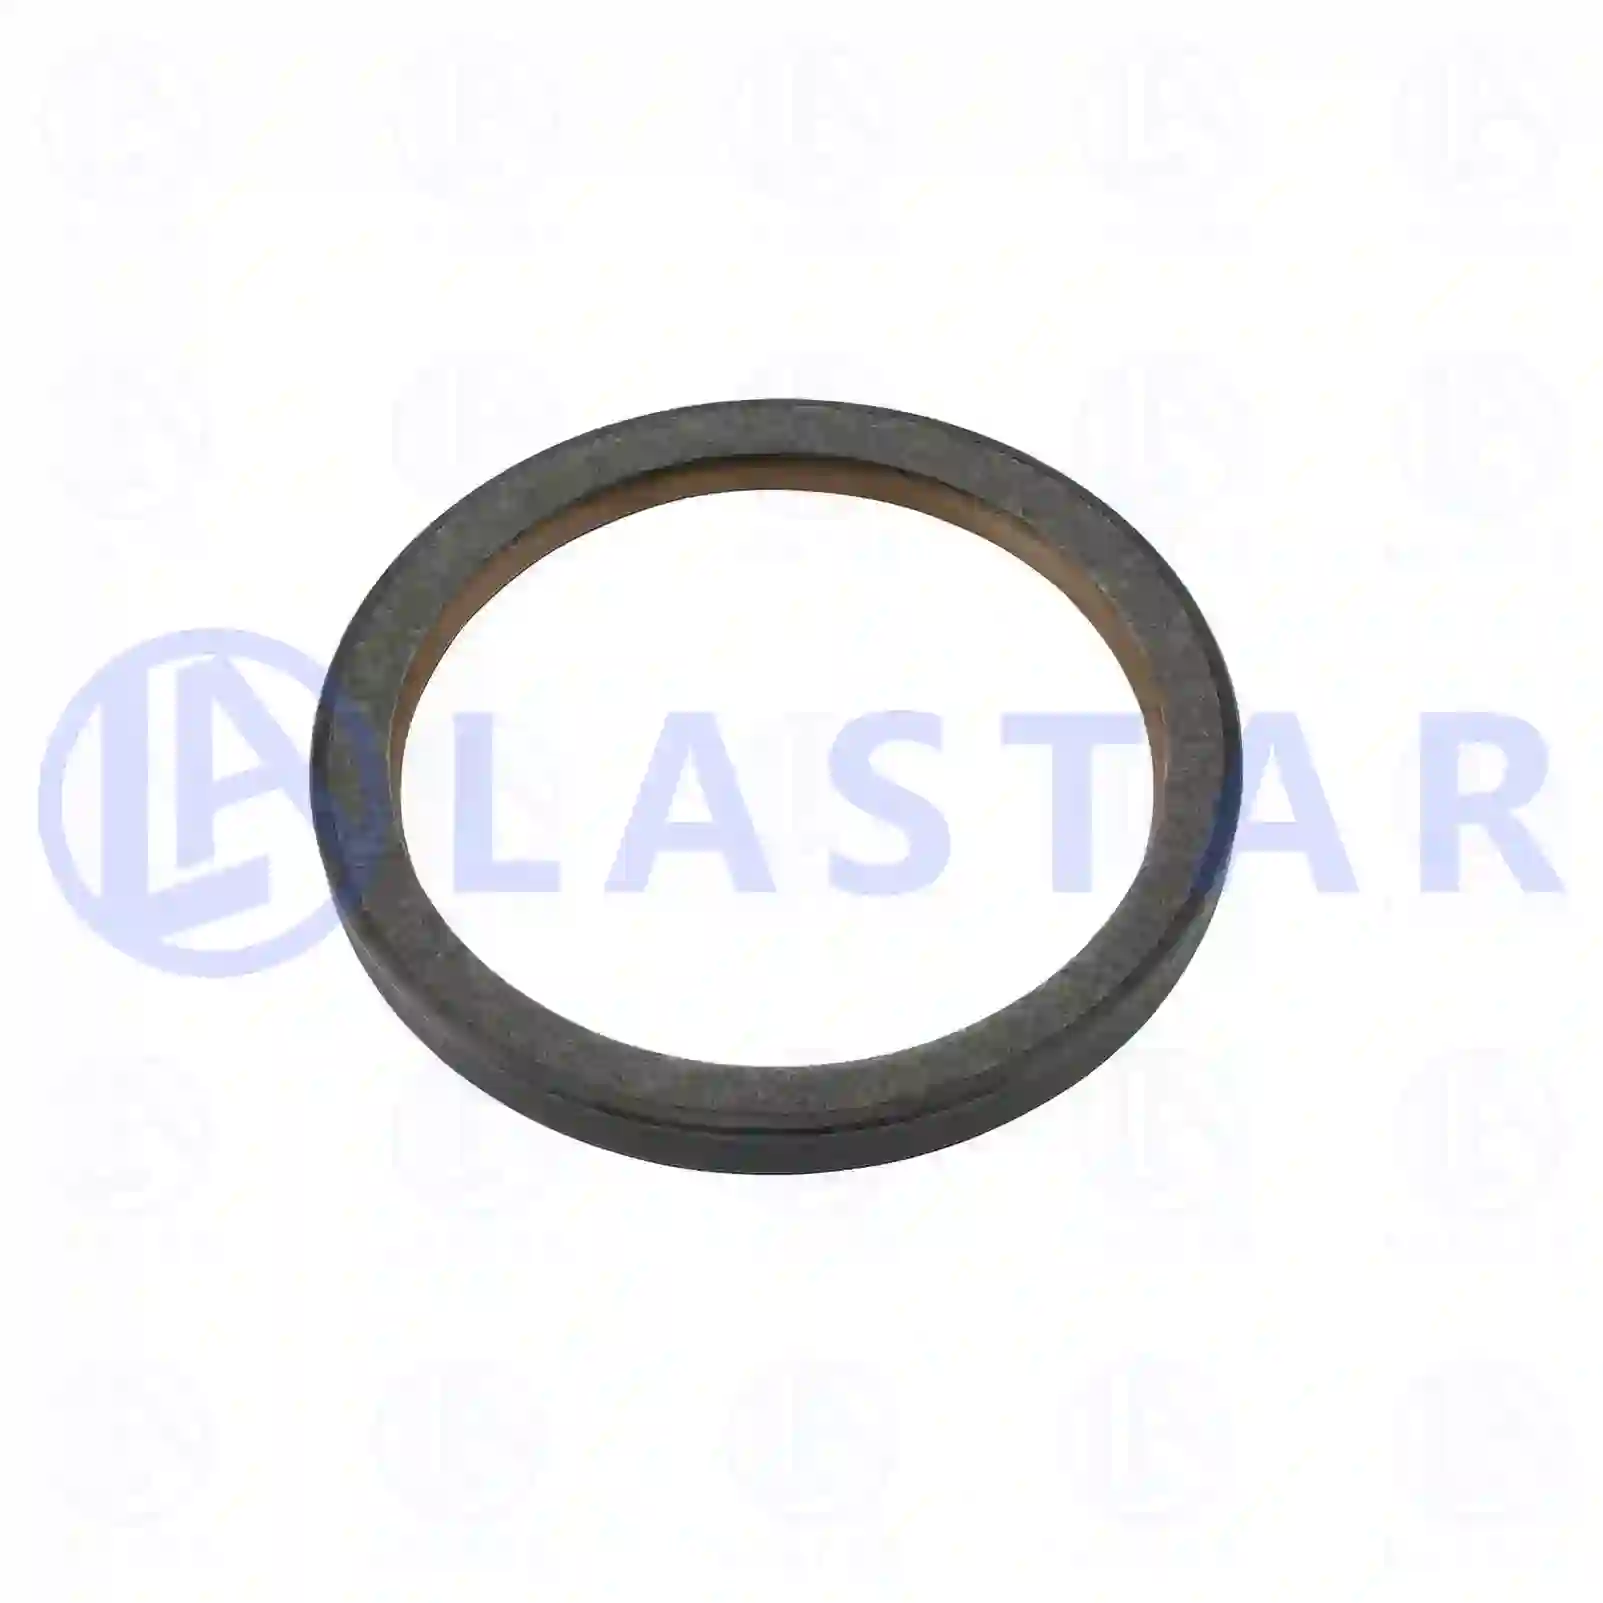 Oil seal, 77701802, 5010817AA, 1054053, 5000667796, 5003087040, 5010339723, ZG02776-0008 ||  77701802 Lastar Spare Part | Truck Spare Parts, Auotomotive Spare Parts Oil seal, 77701802, 5010817AA, 1054053, 5000667796, 5003087040, 5010339723, ZG02776-0008 ||  77701802 Lastar Spare Part | Truck Spare Parts, Auotomotive Spare Parts